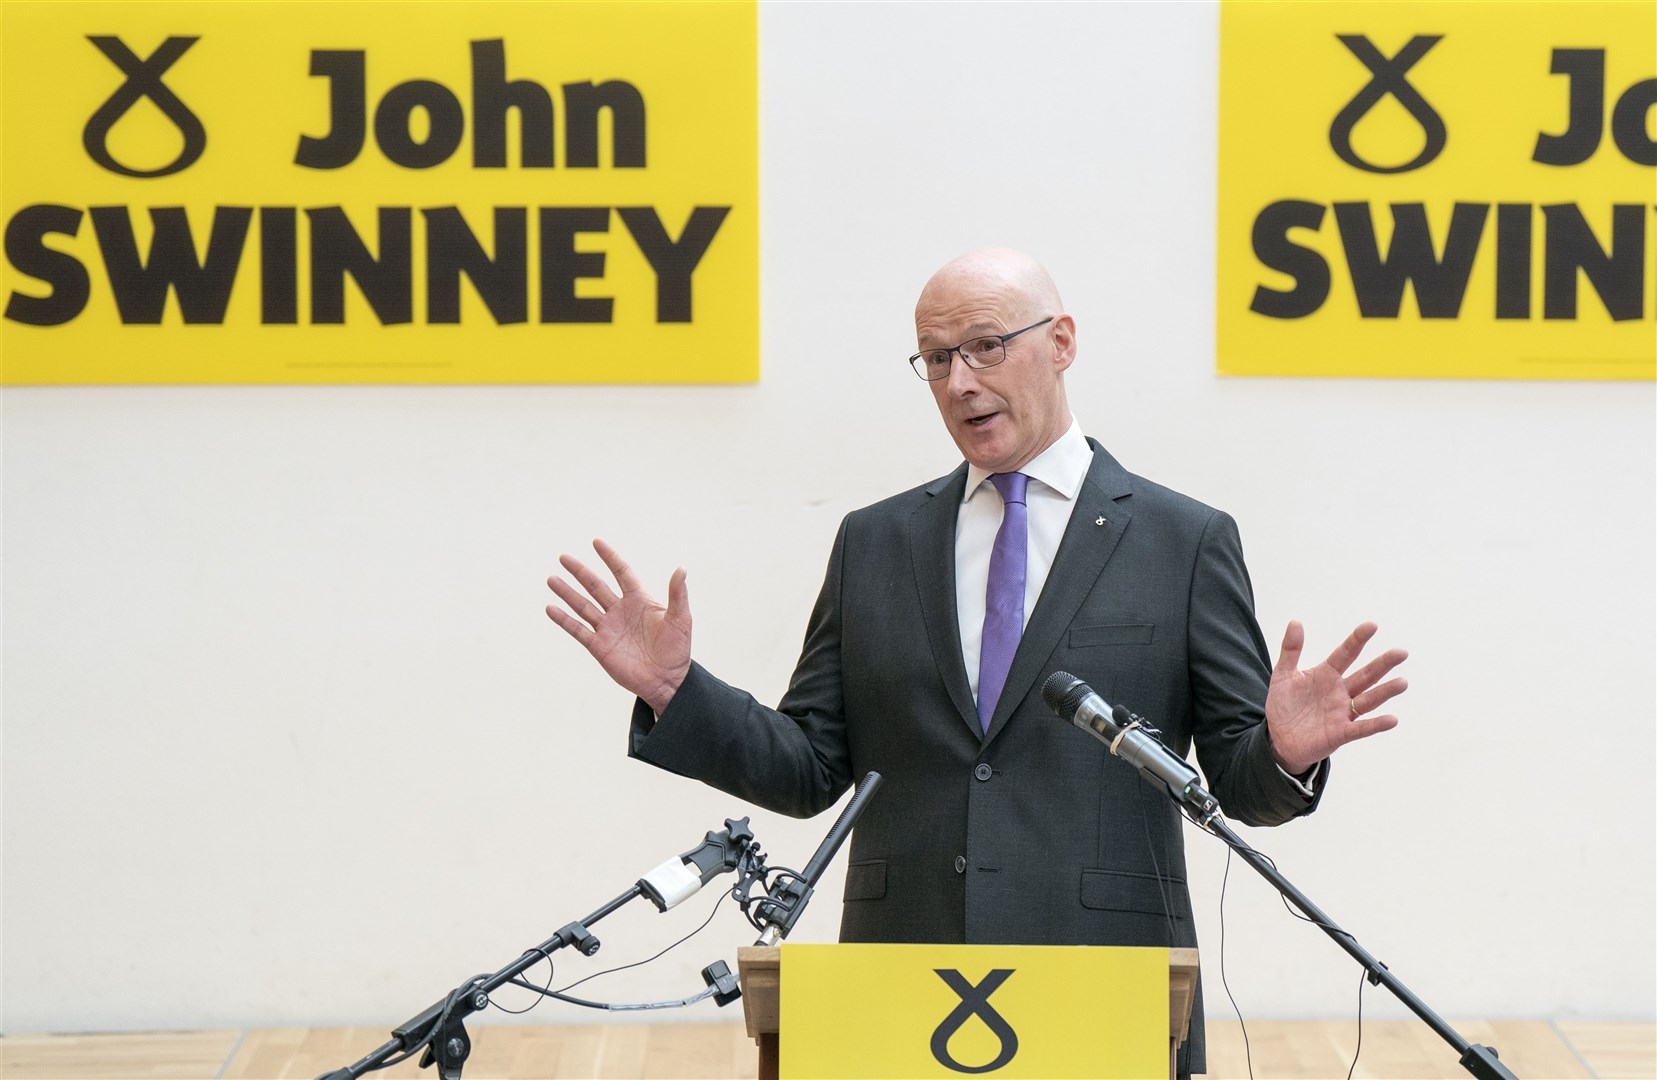 John Swinney praised Kate Forbes as he officially launched his bid to be the next SNP leader and Scottish first minister (Jane Barlow/PA)